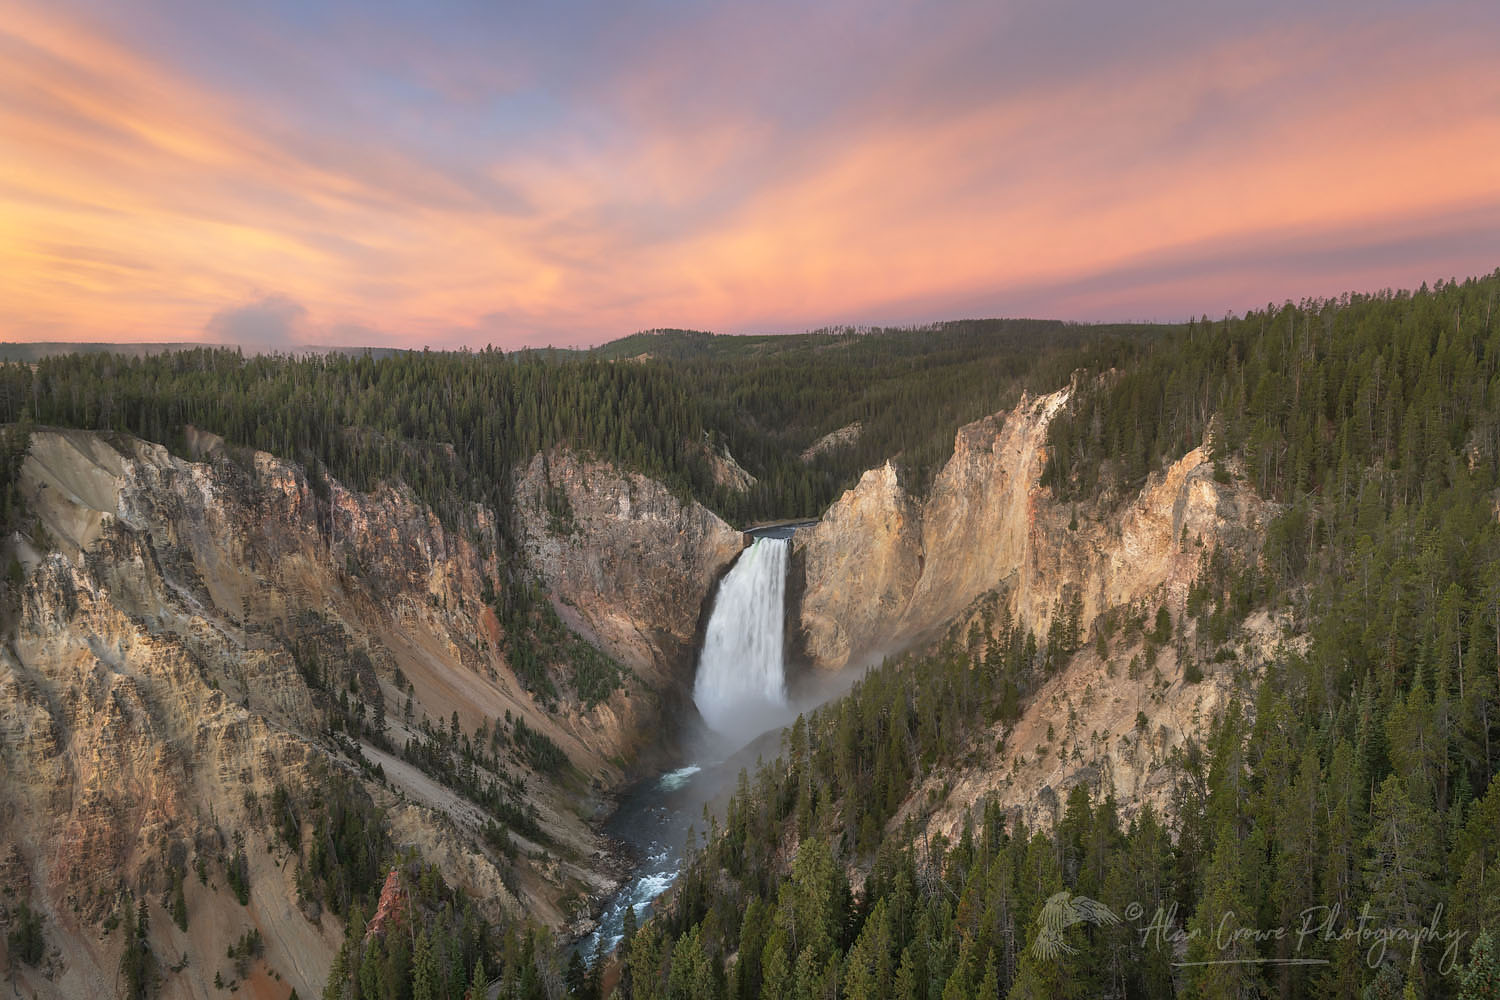 Sunrise over Lower Falls of the Yellowstone River seen from Lookout Point, Yellowstone National Park #67943